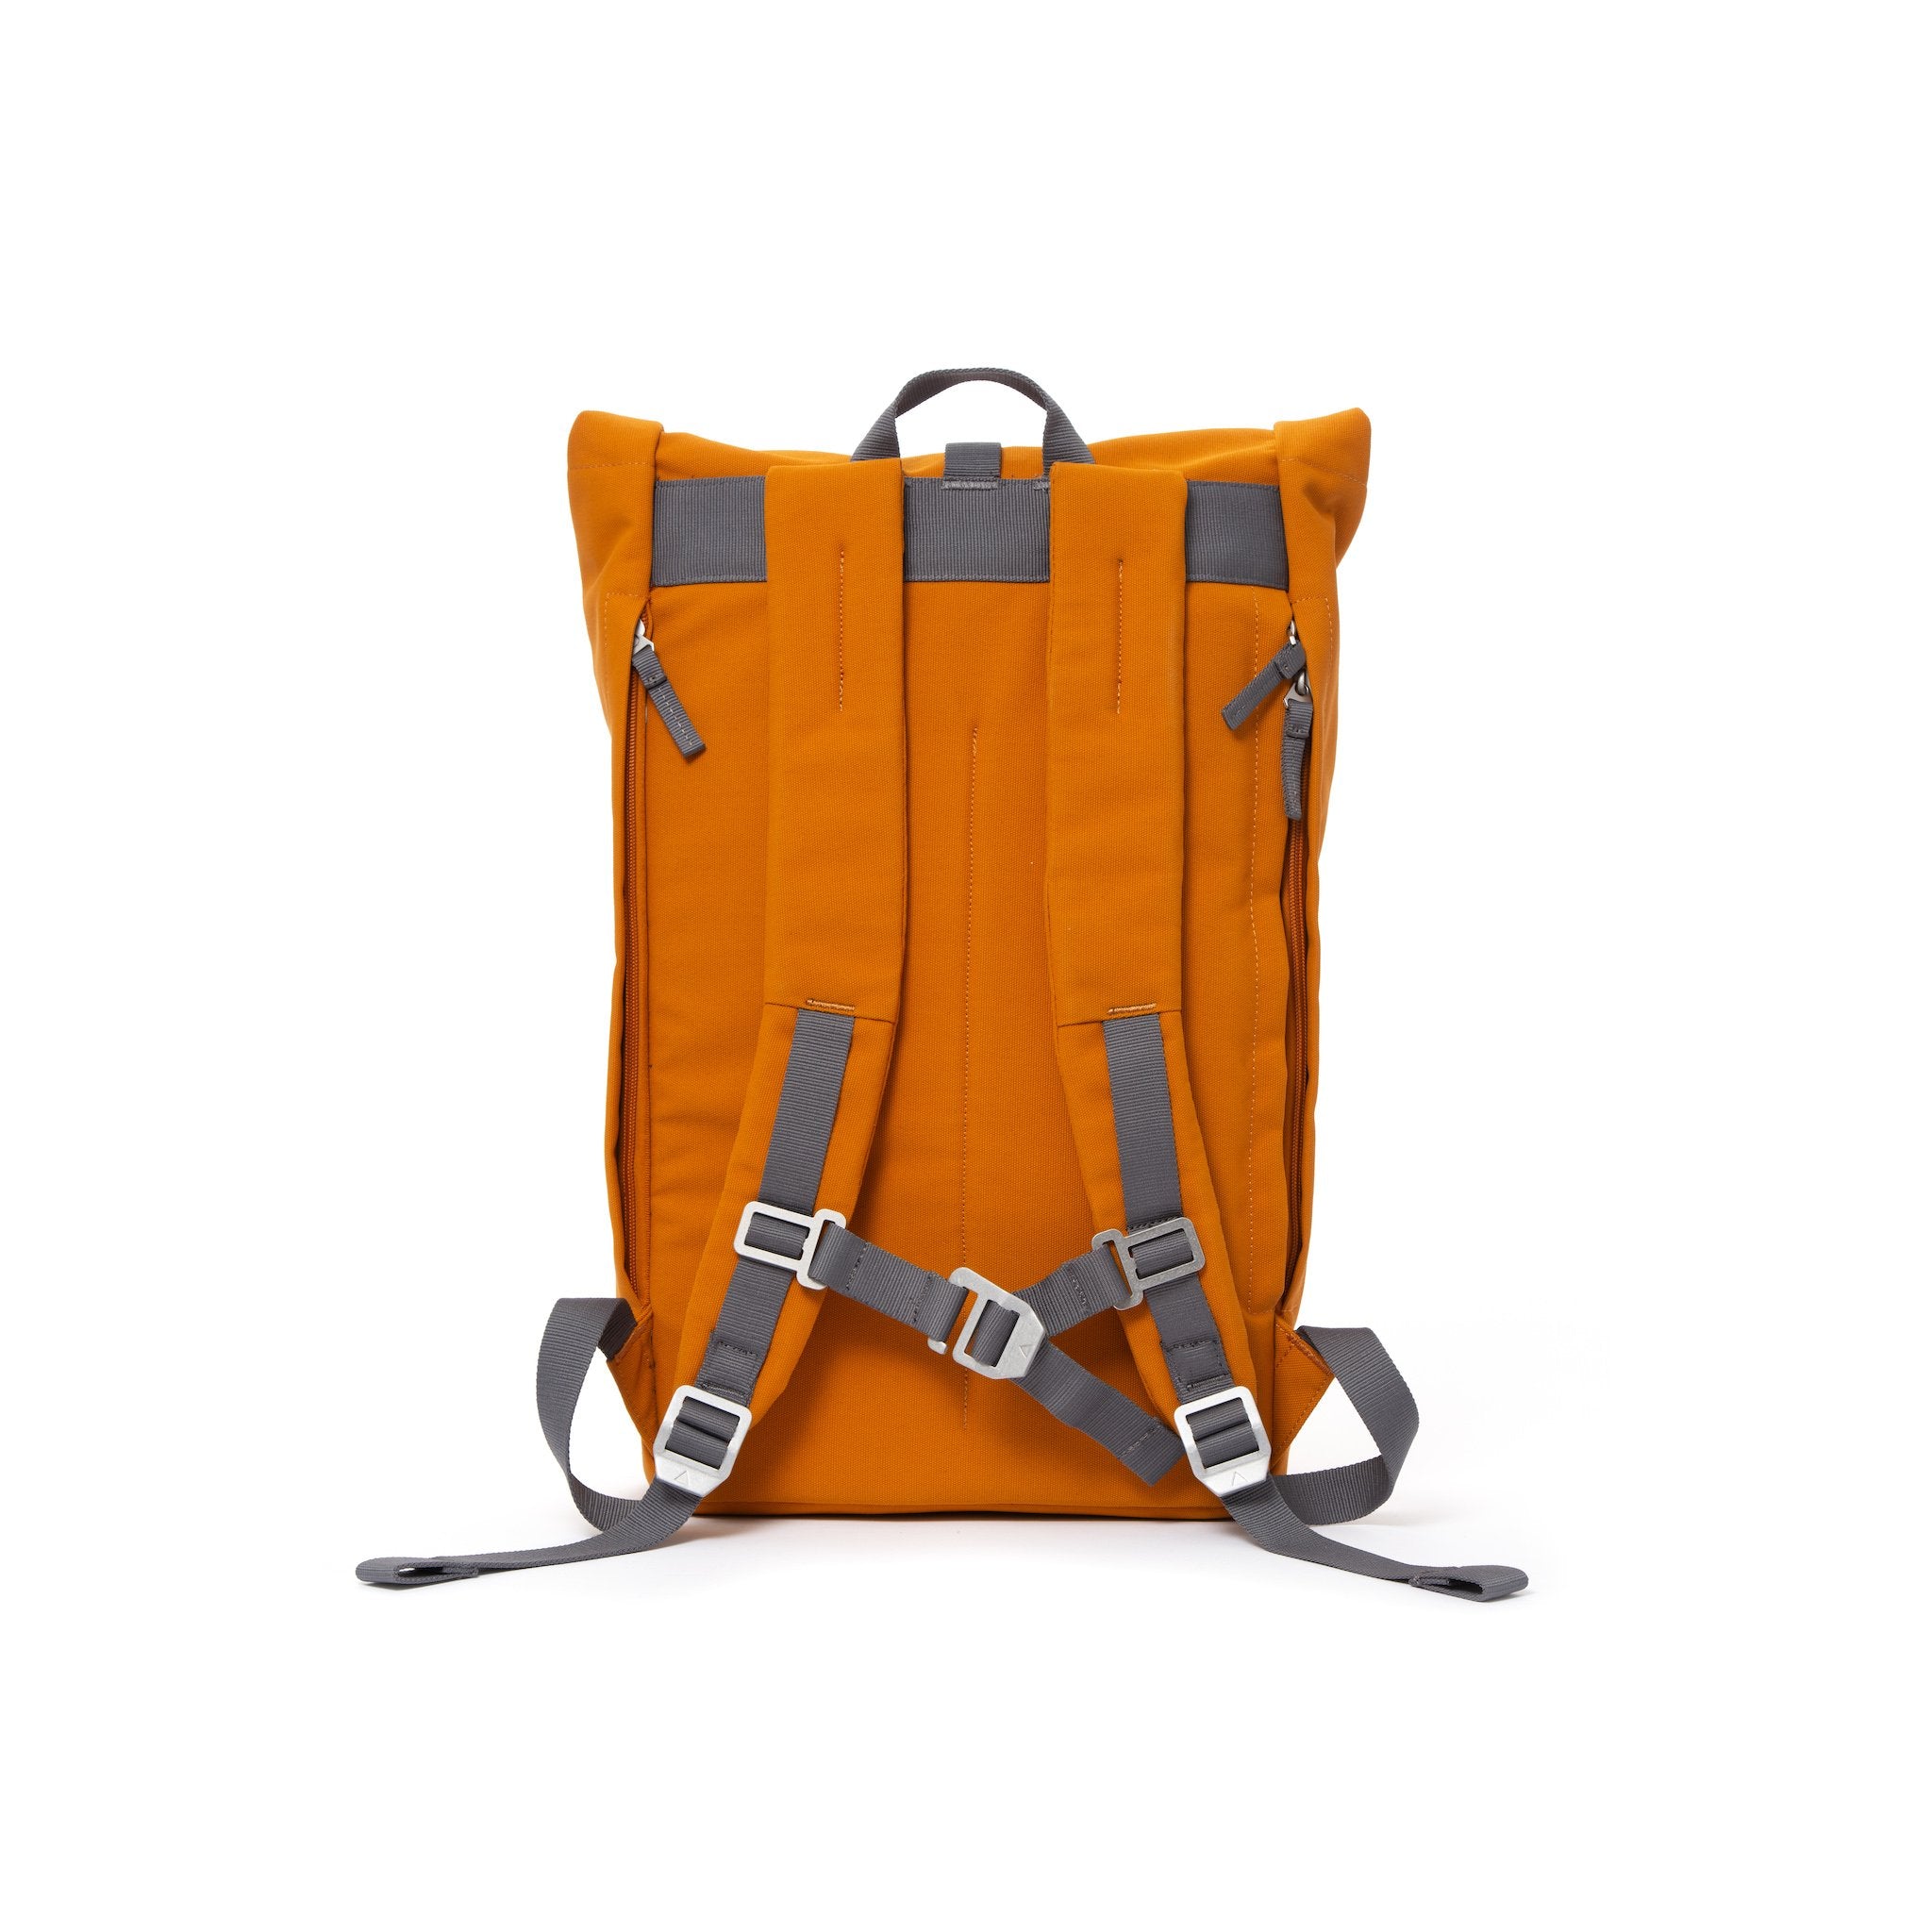 Orange rolltop backpack with padded shoulder straps and chest strap.